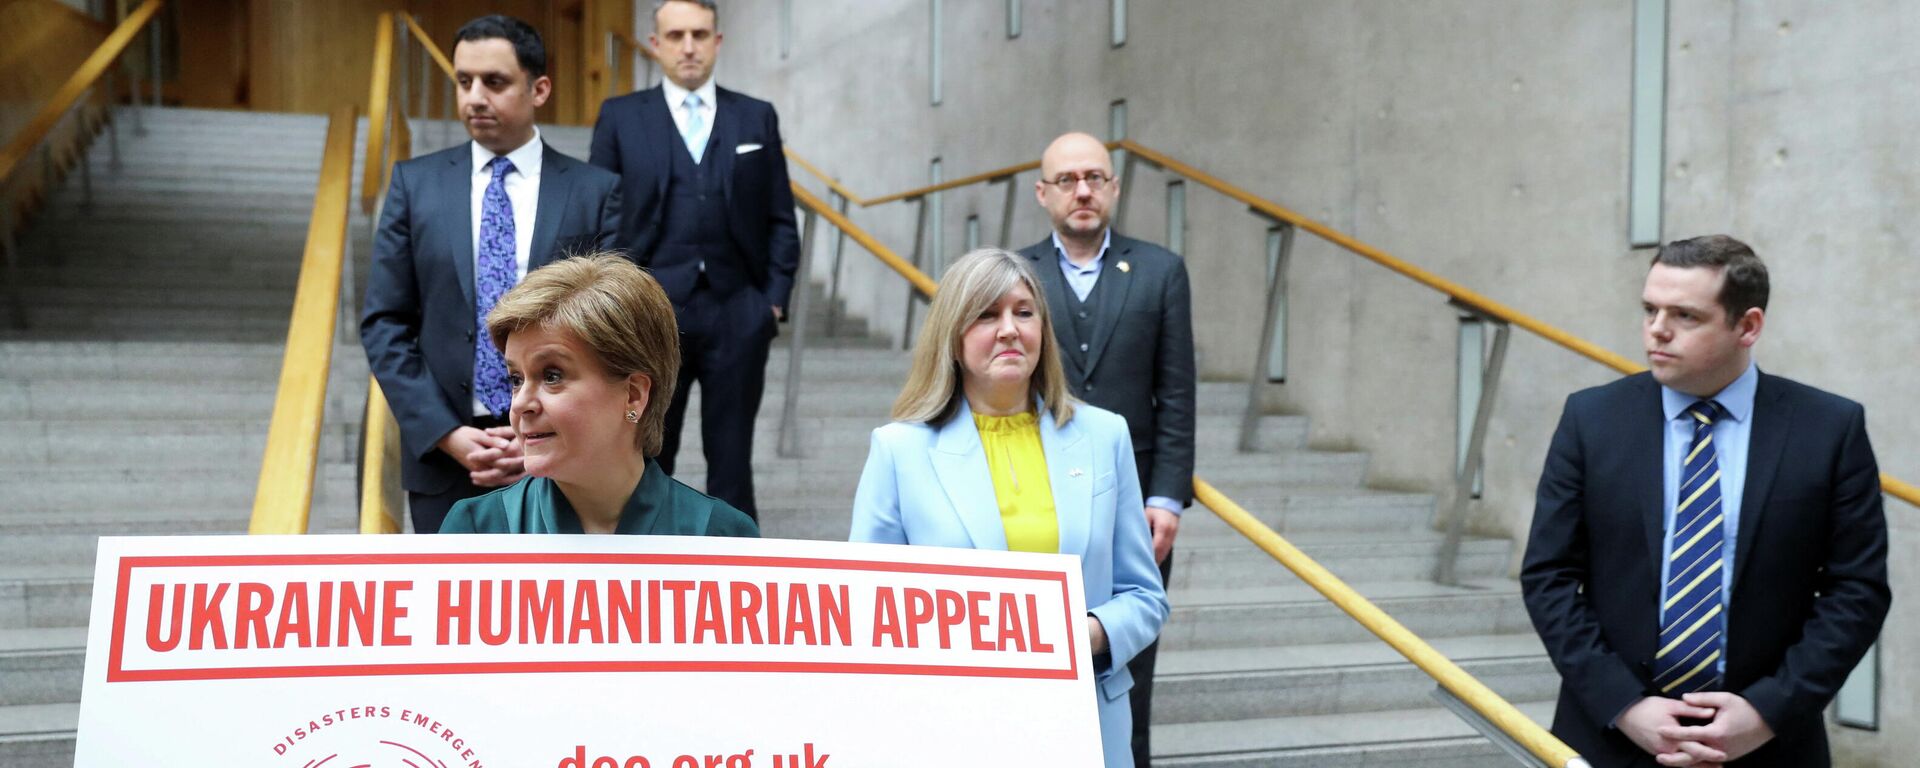 Scotland's First Minister and leader of the Scottish National Party, Nicola Sturgeon, launches Ukraine Humanitarian appeal with other party leaders at the parliament in Edinburgh - Sputnik International, 1920, 11.03.2022